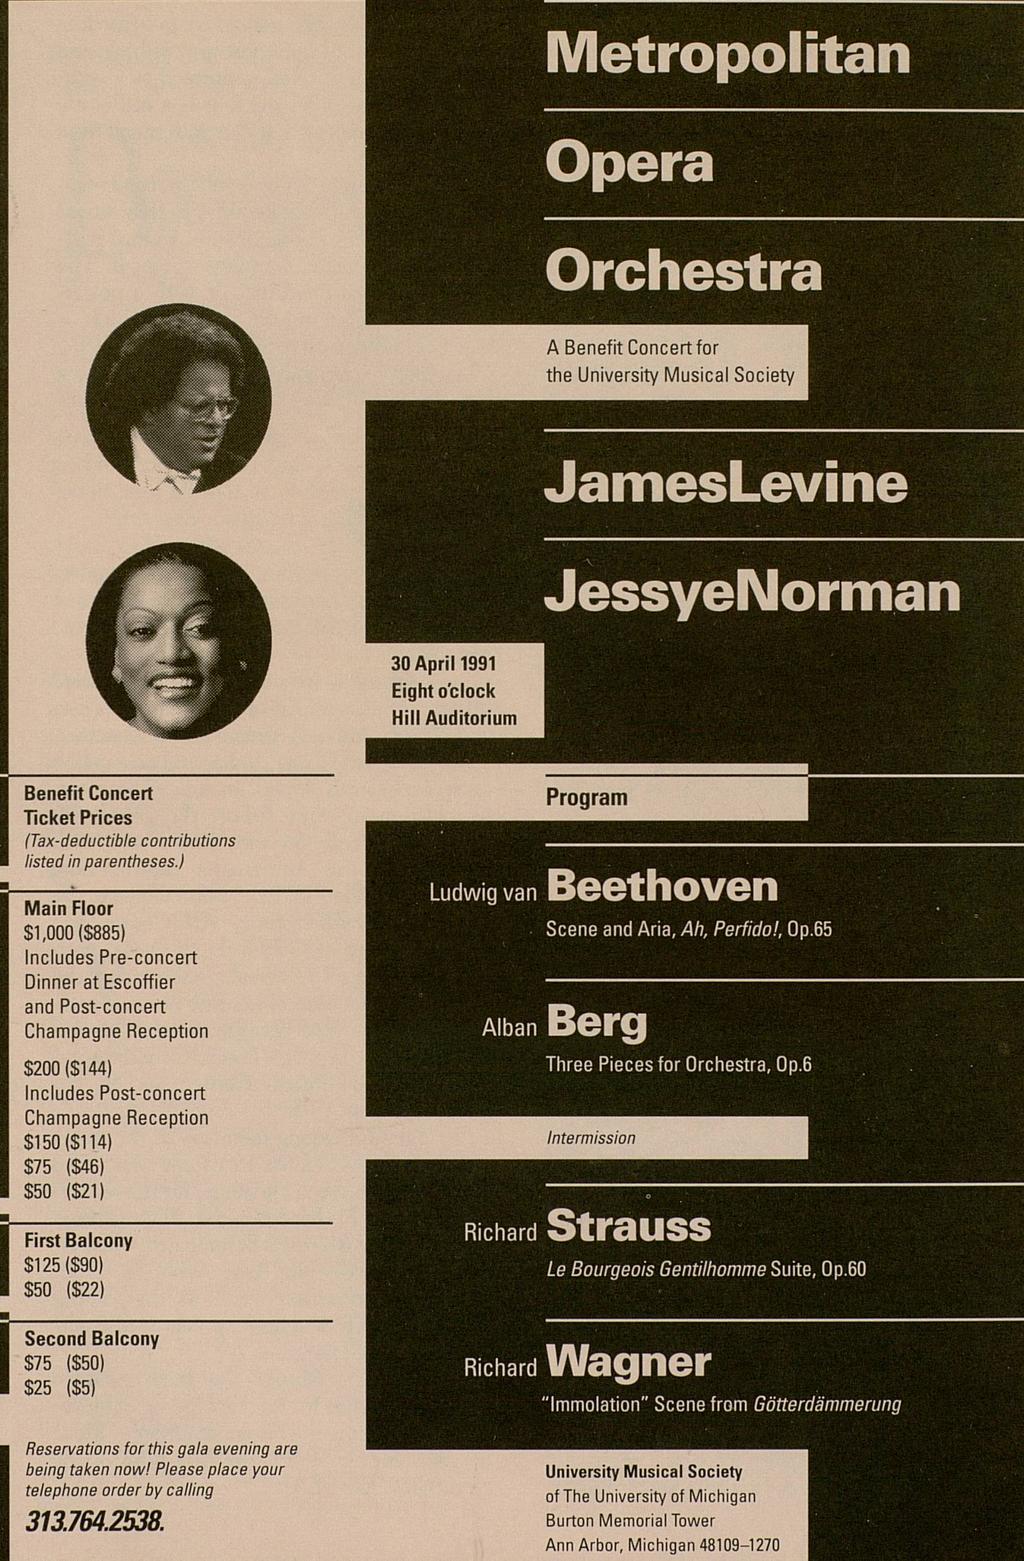 Metropolitan Opera Orchestra A Benefit Concert for the University Musical Society JamesLevine JessyelMorman 30 April 1991 Eight o'clock Hill Auditorium Benefit Concert Ticket Prices (Tax-deductible